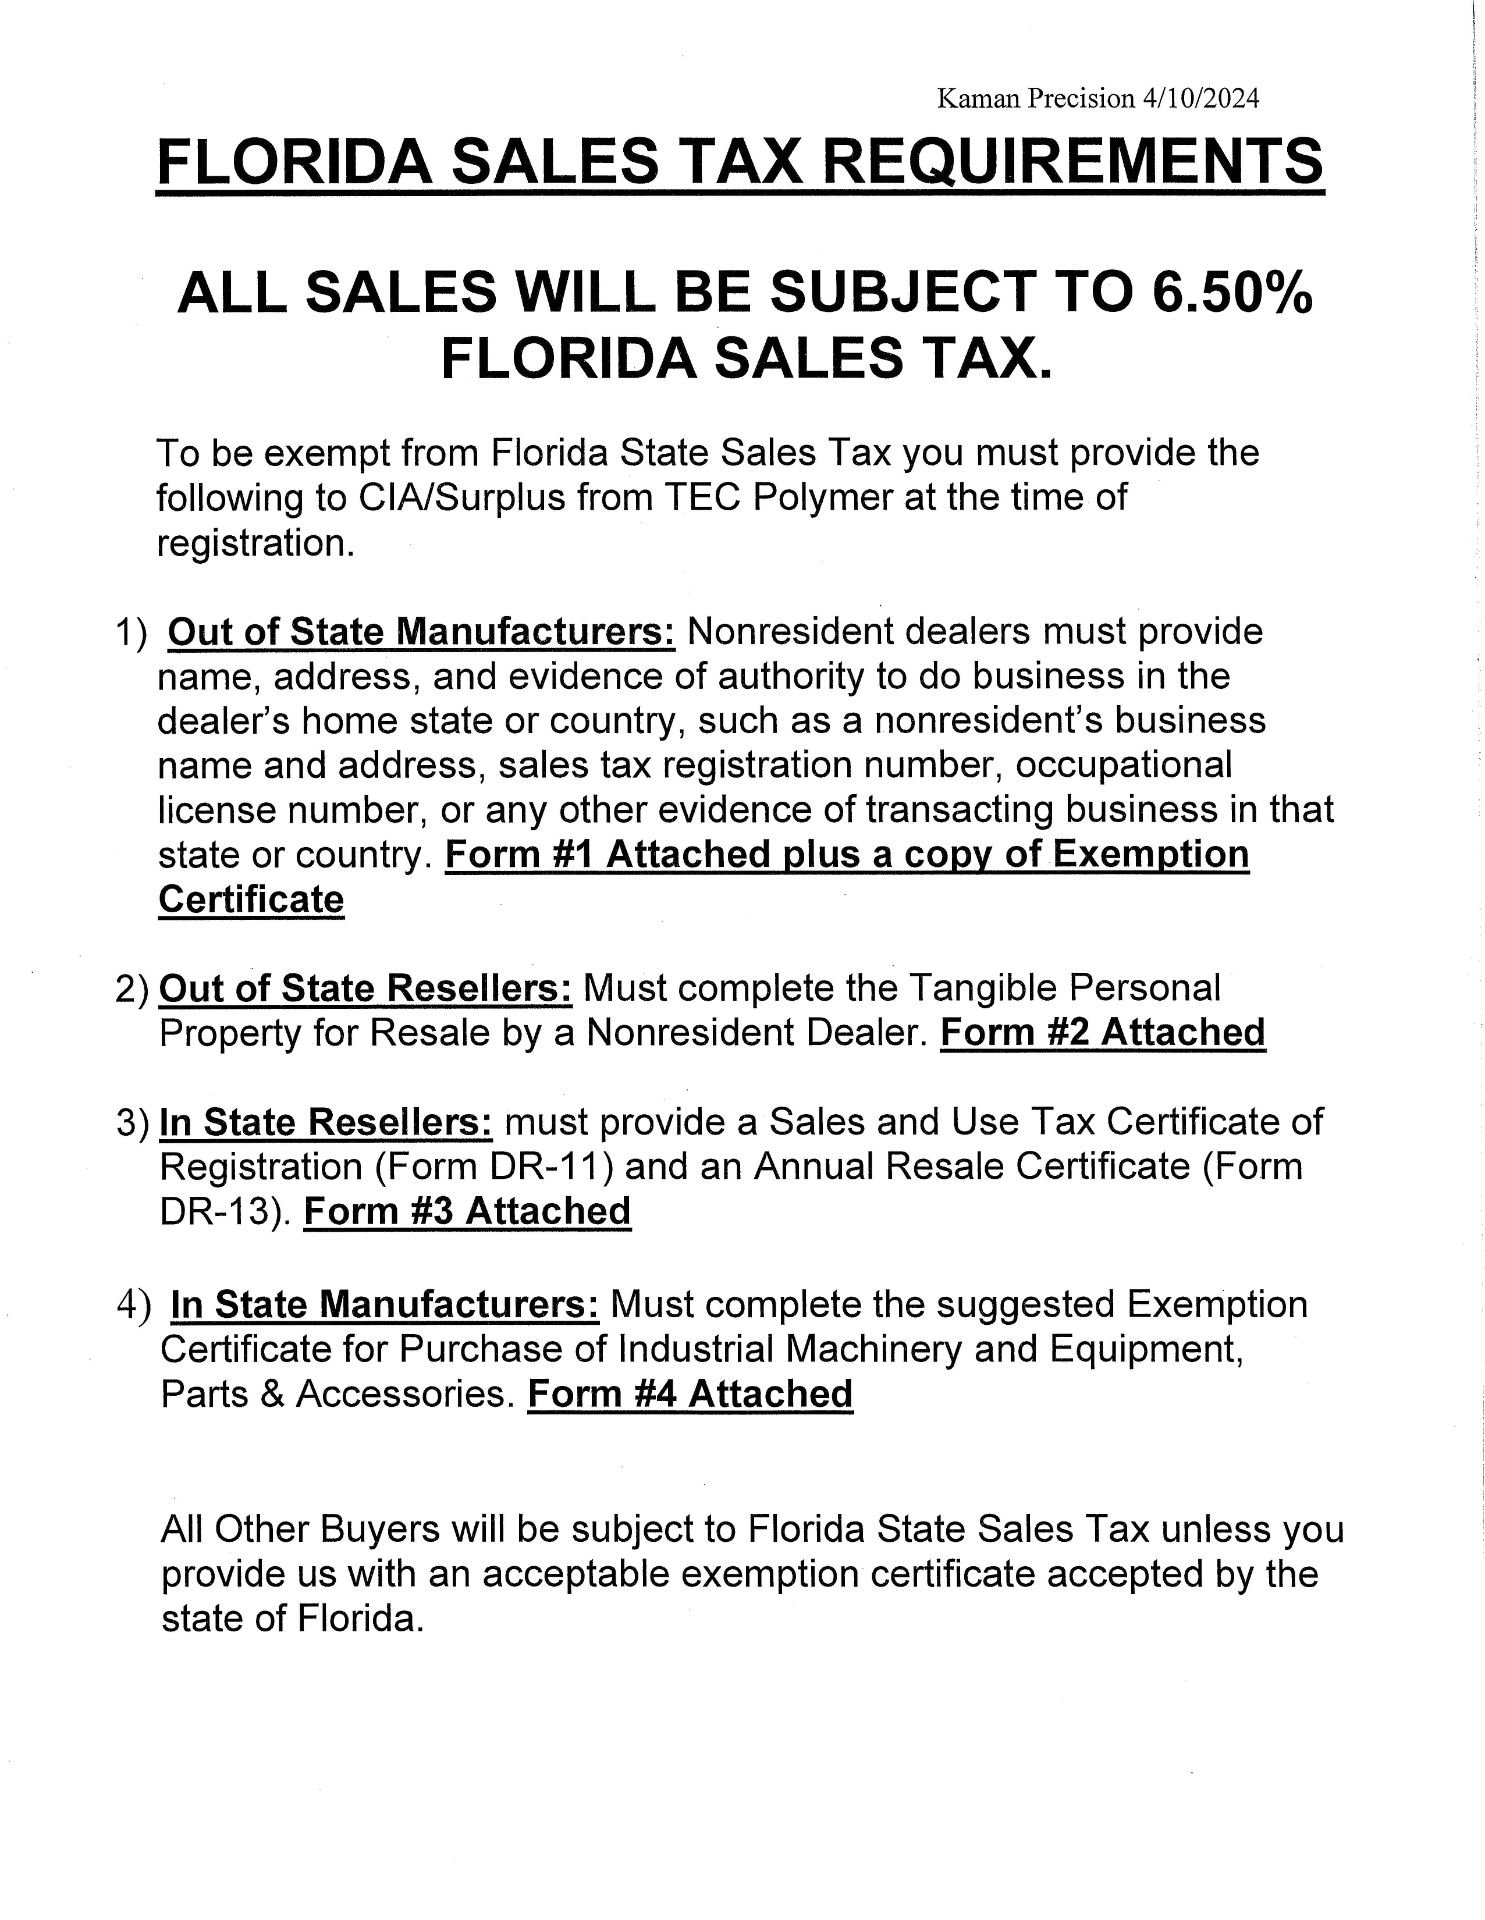 SALES TAX - 6.50% - Image 2 of 6